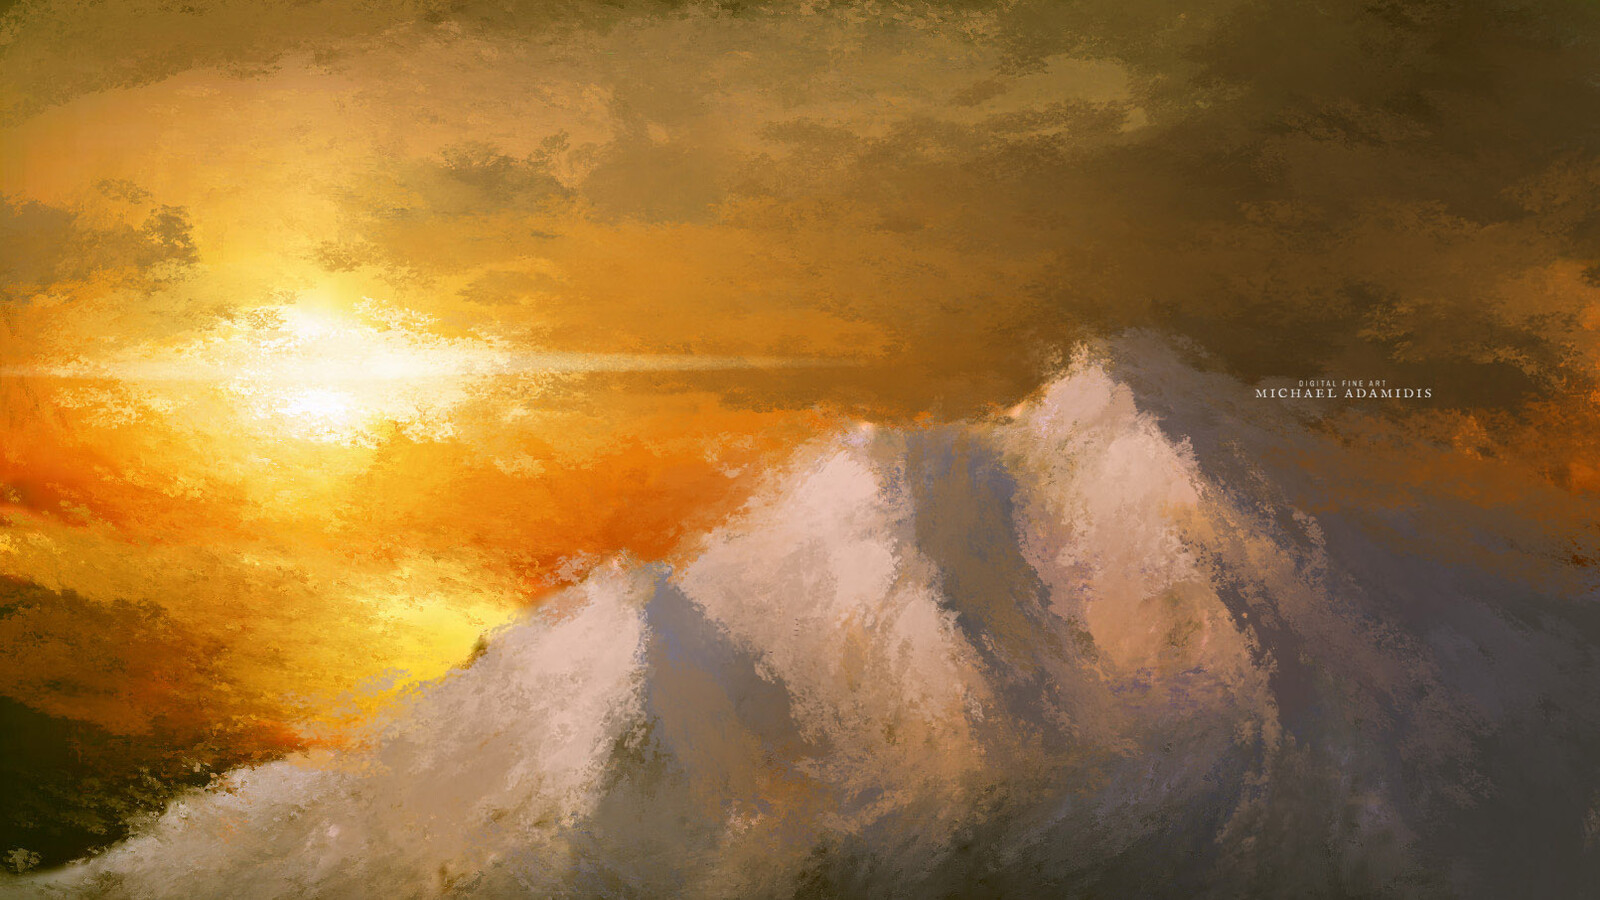 Loose Digial Painting - Mountains Tops Scenery